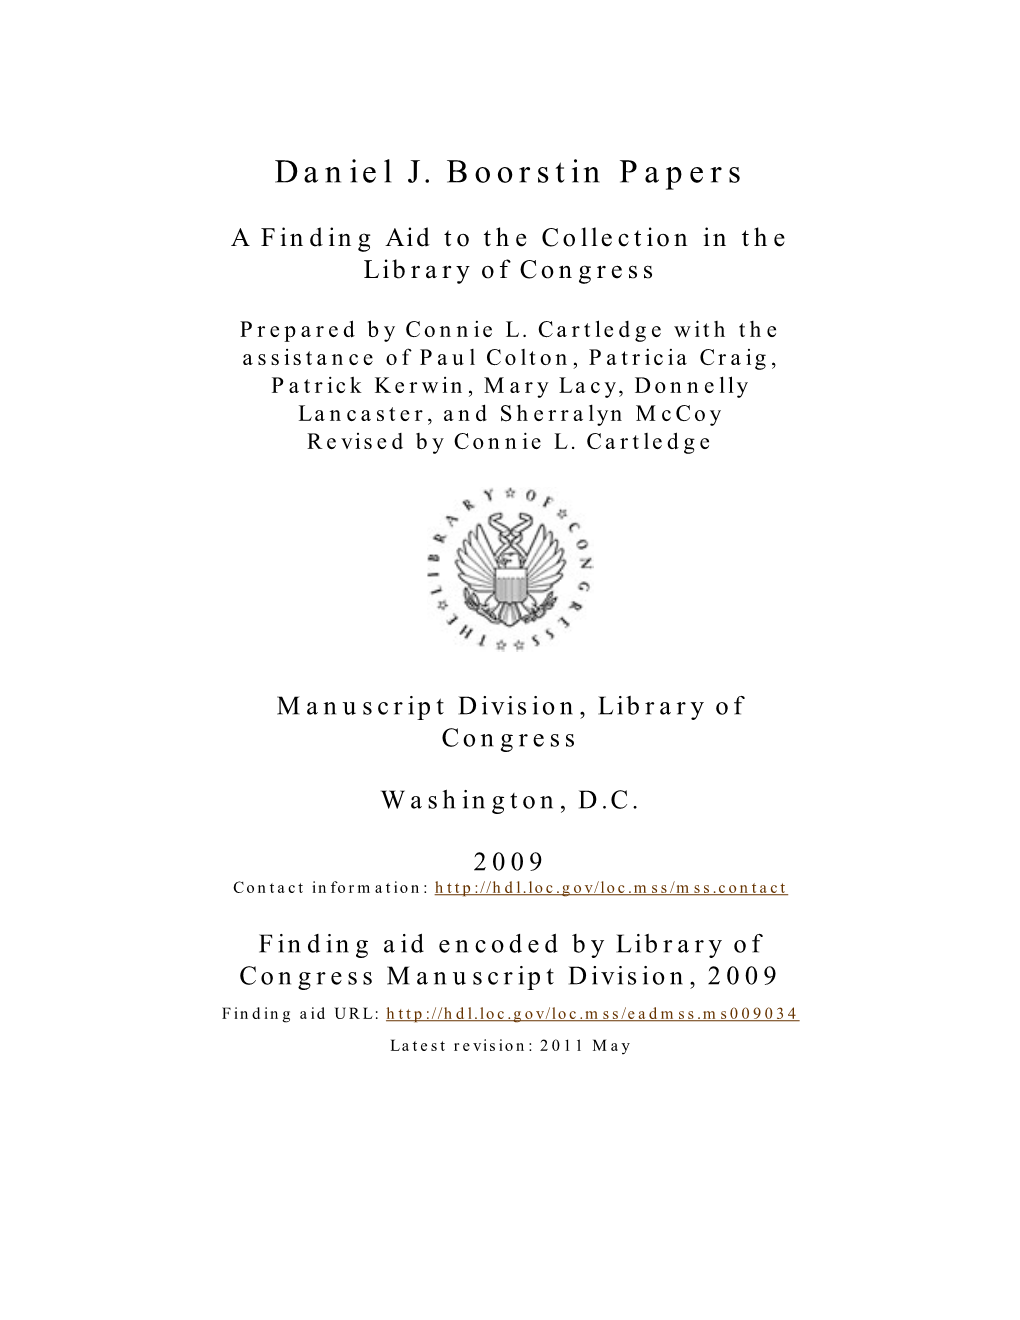 Daniel J. Boorstin Papers [Finding Aid]